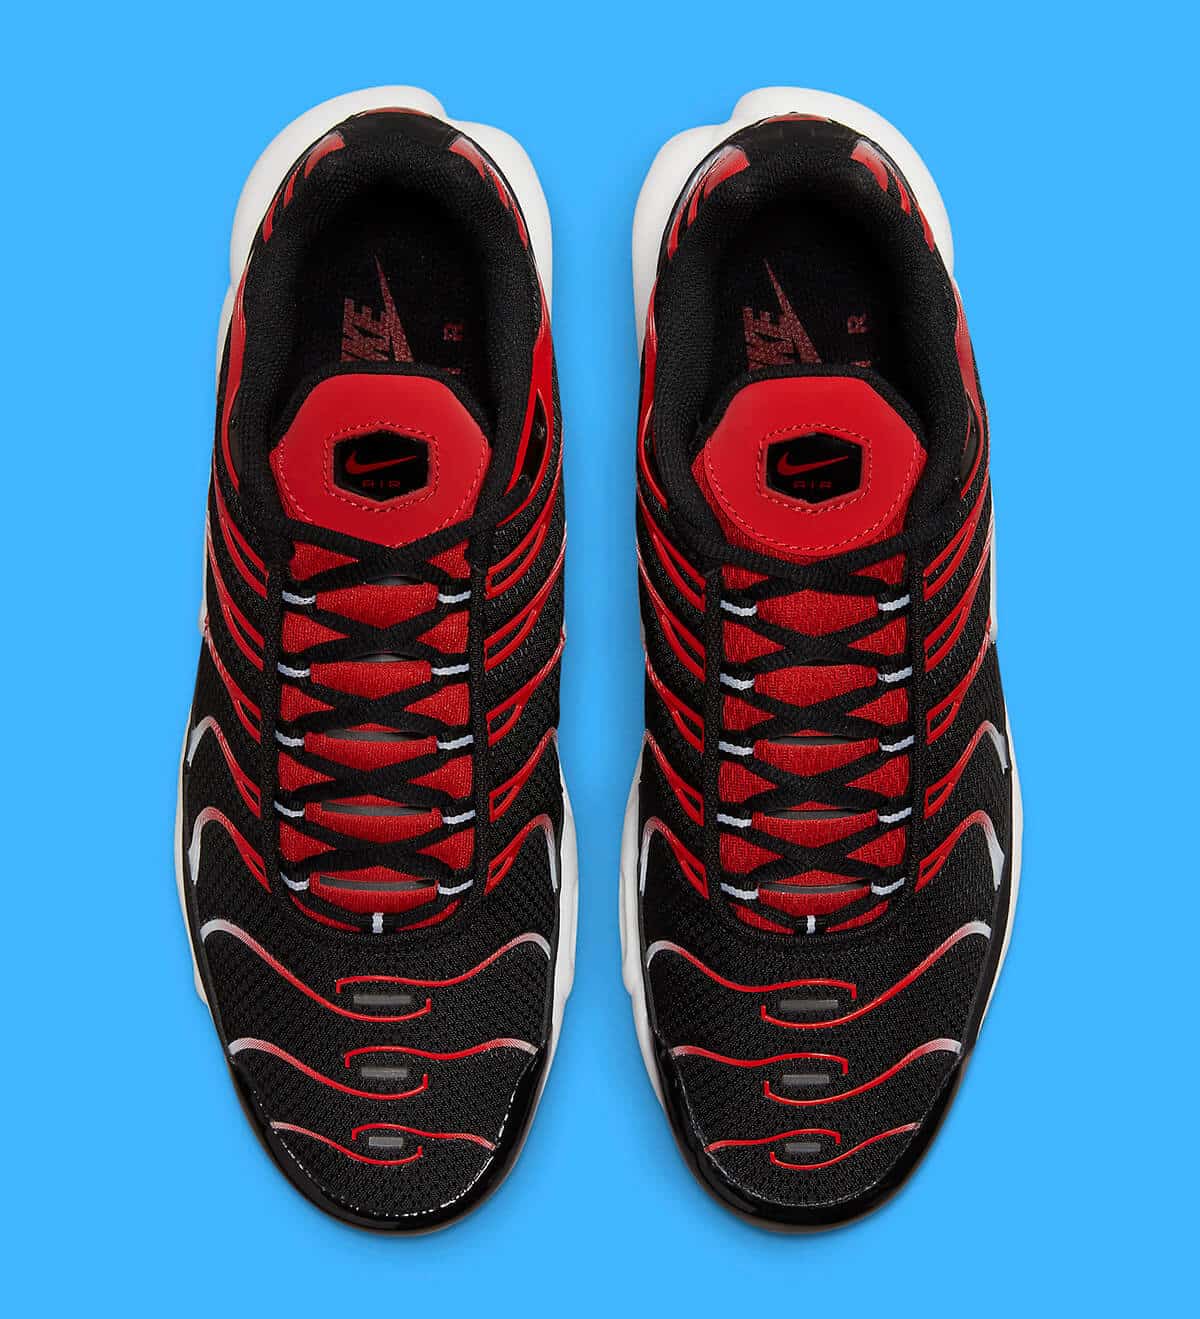 TN Air Max Plus Black and White with Red Strike